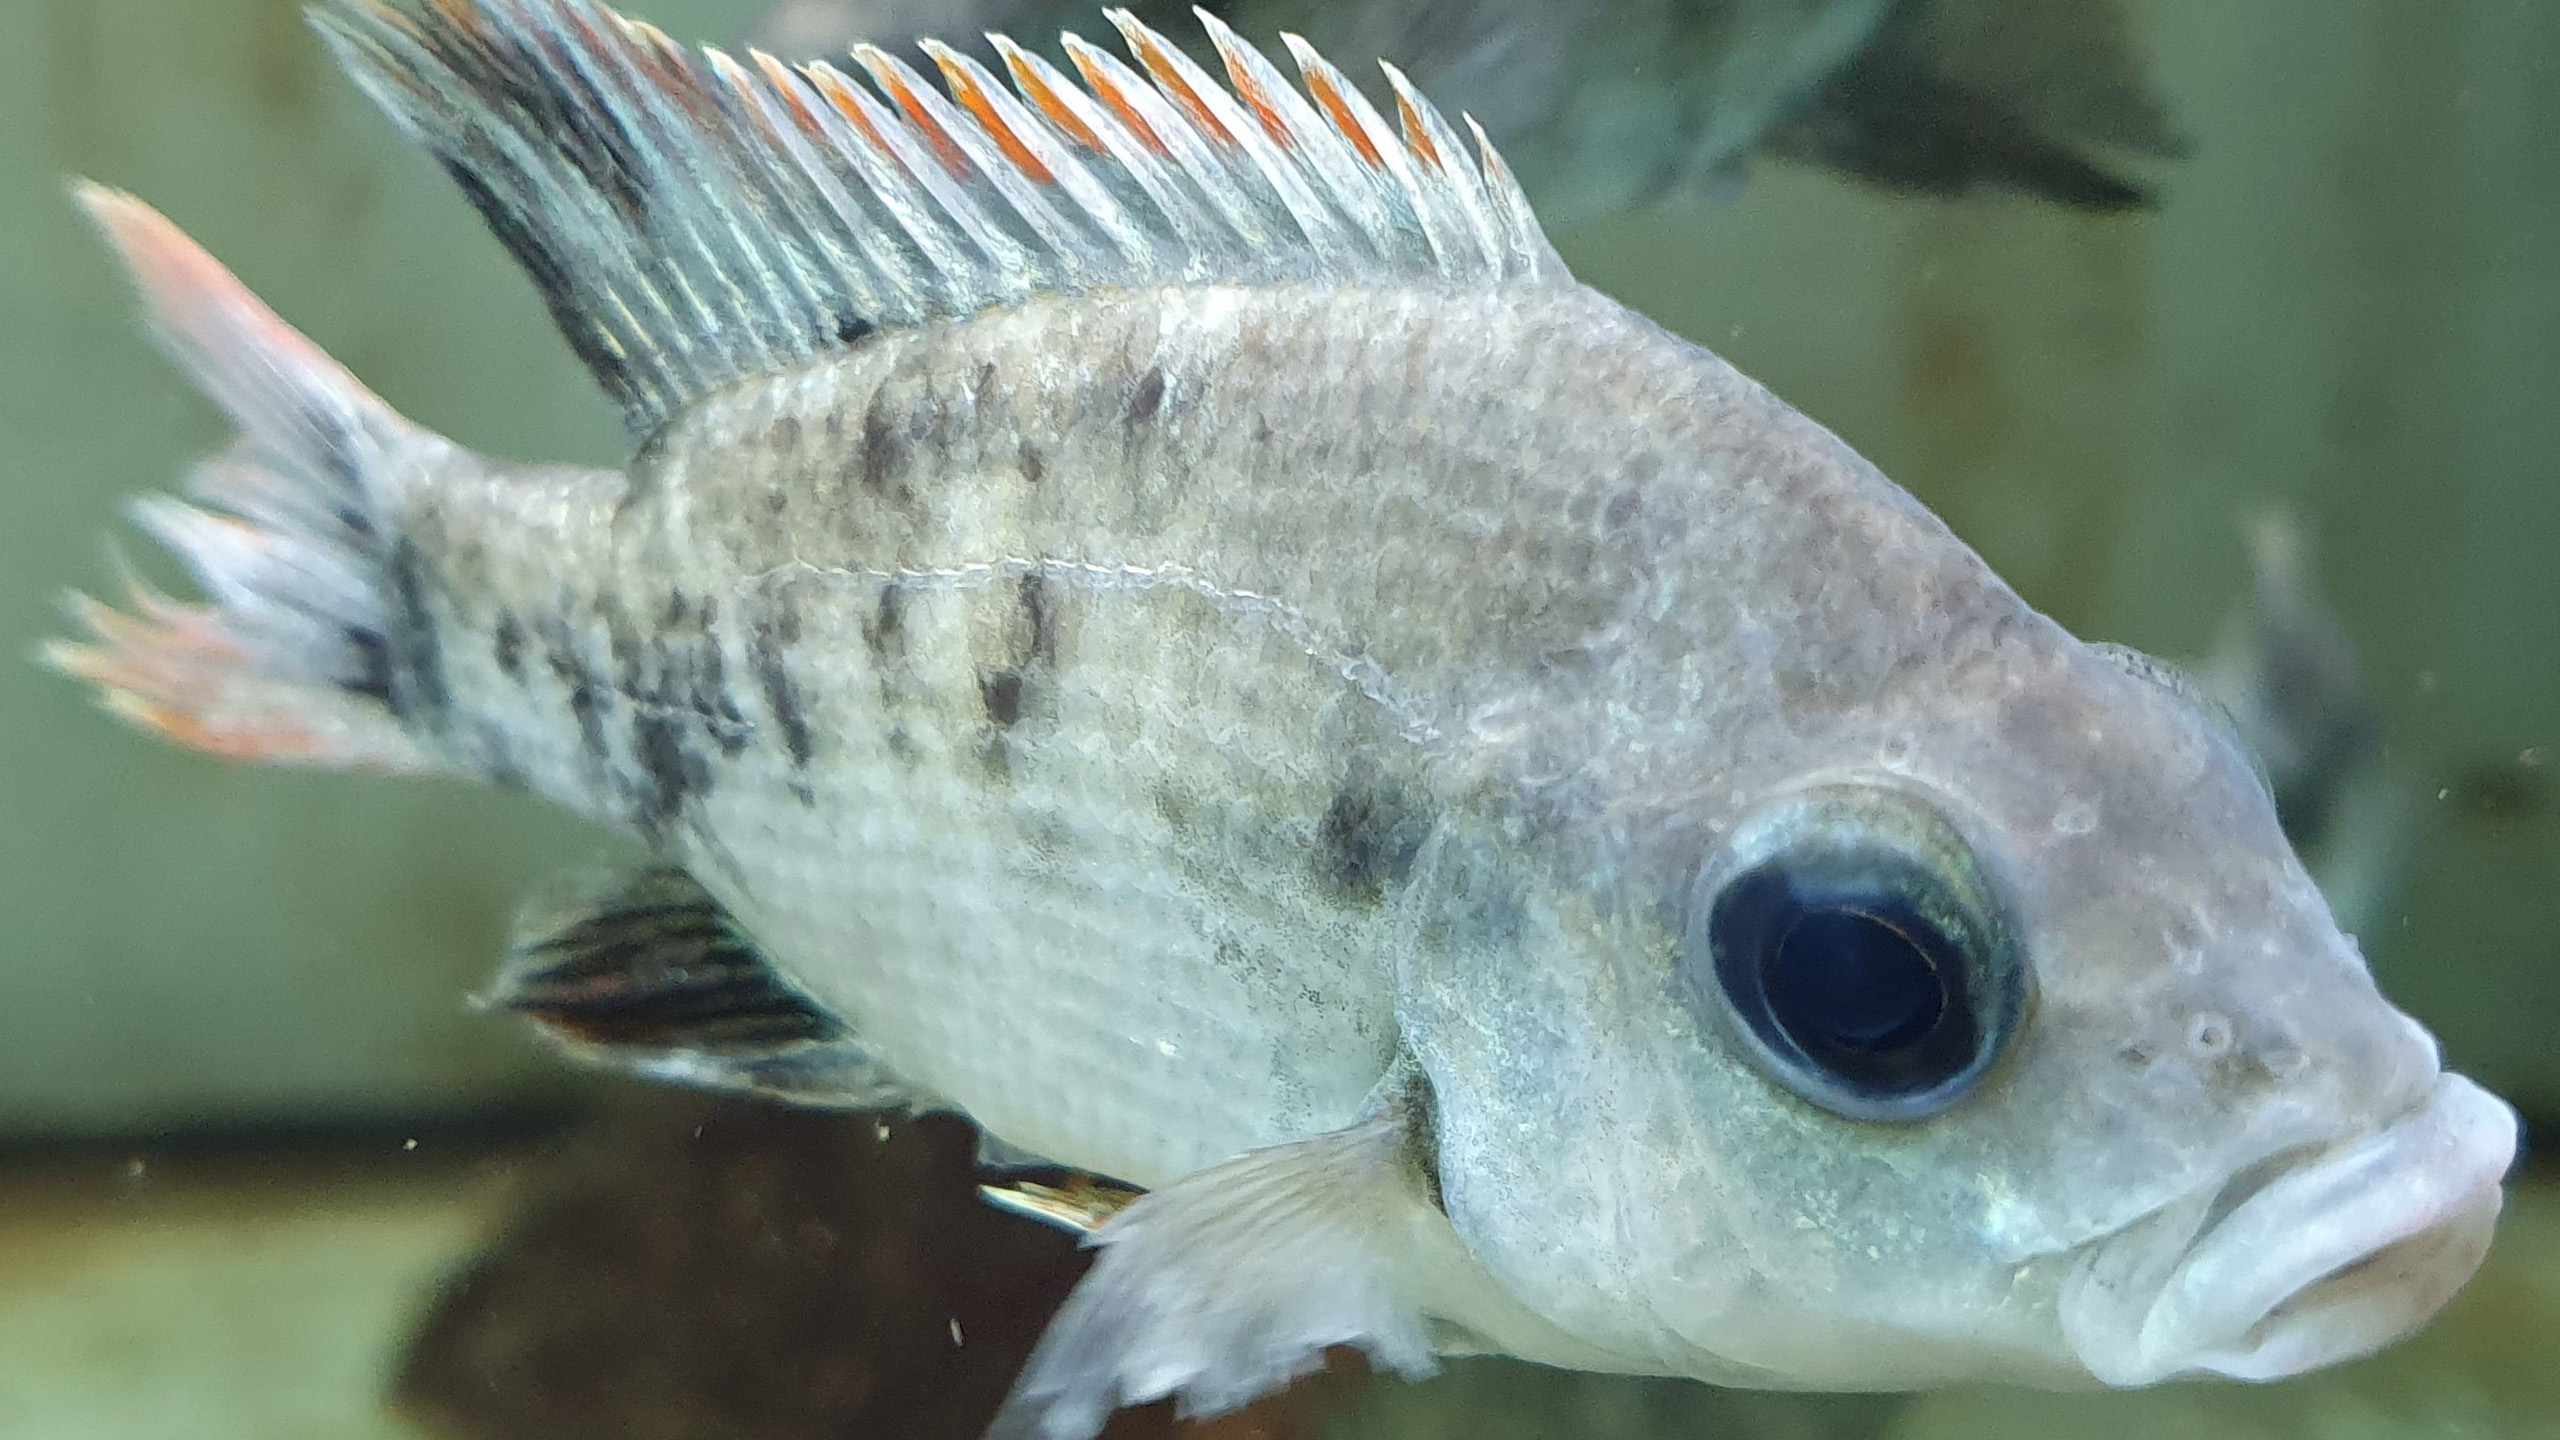 The Mangarahara cichlid (Ptychochromis insolitus) was considered the "rarest fish in the world". Citizen Conservation also runs a conservation breeding program for it. | Thomas Ziegler